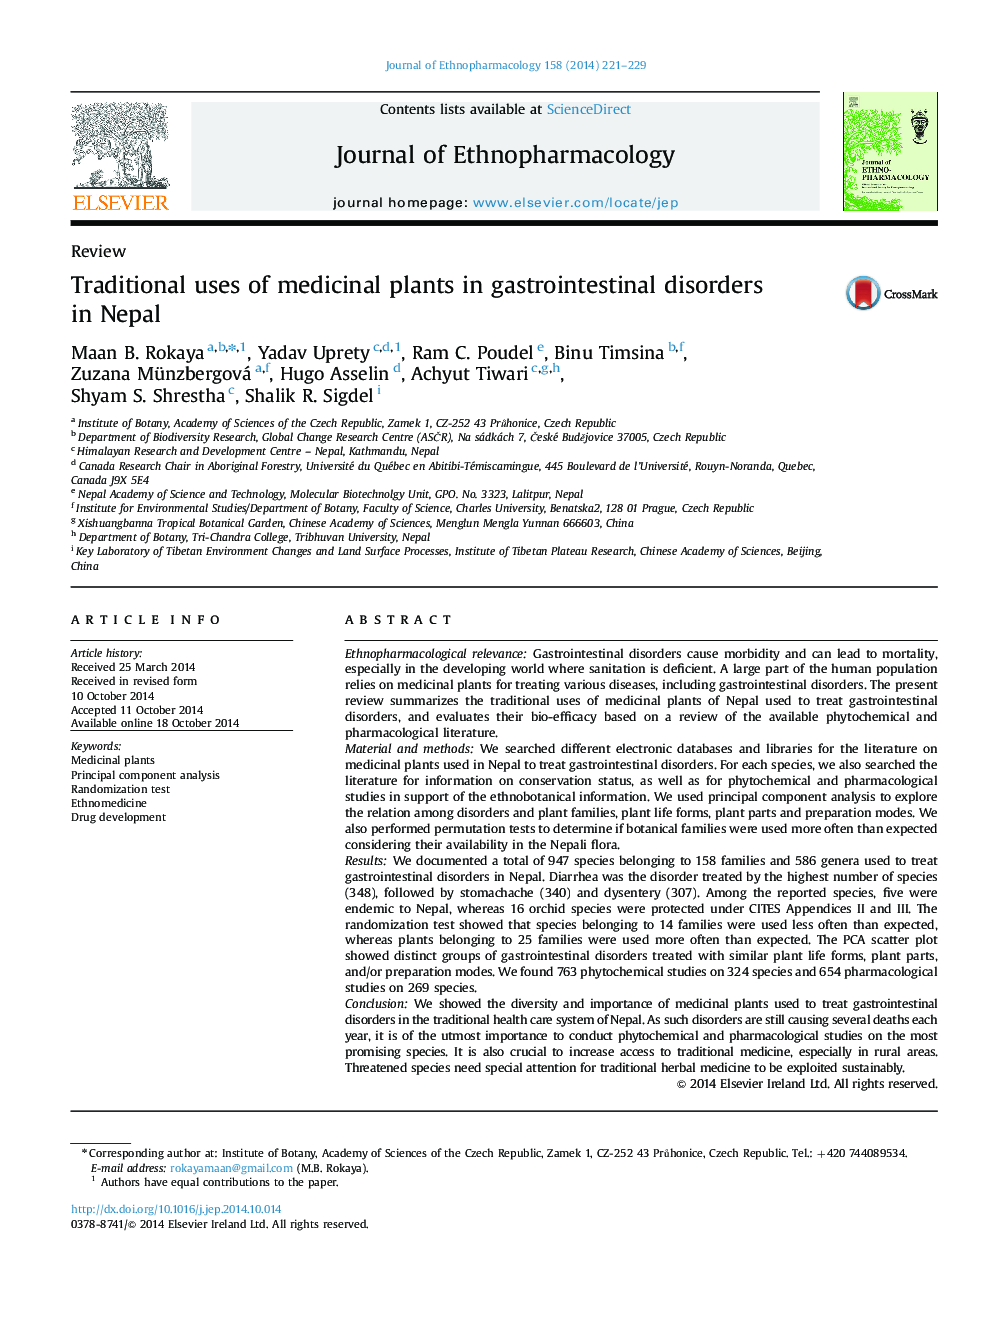 Traditional uses of medicinal plants in gastrointestinal disorders in Nepal